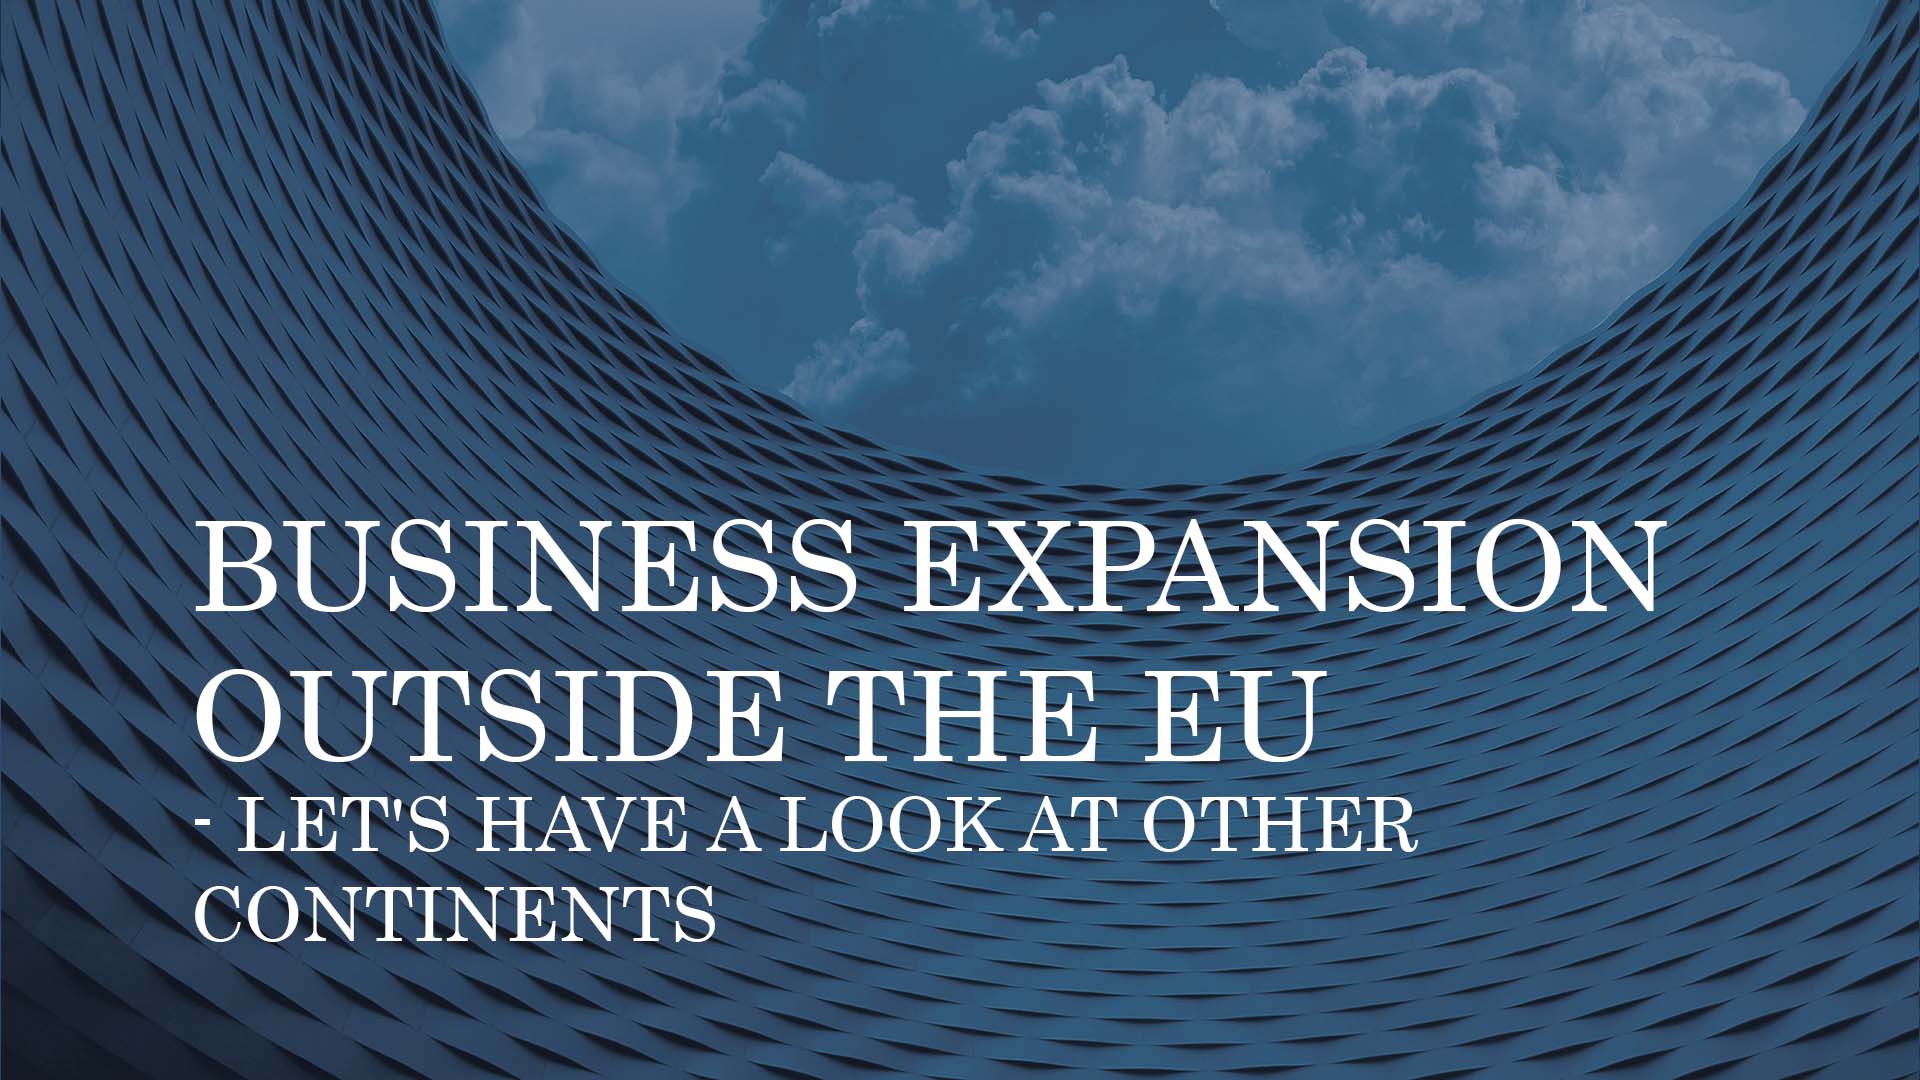 BUSINESS EXPANSION OUTSIDE THE EU – LET’S HAVE A LOOK AT OTHER CONTINENTS